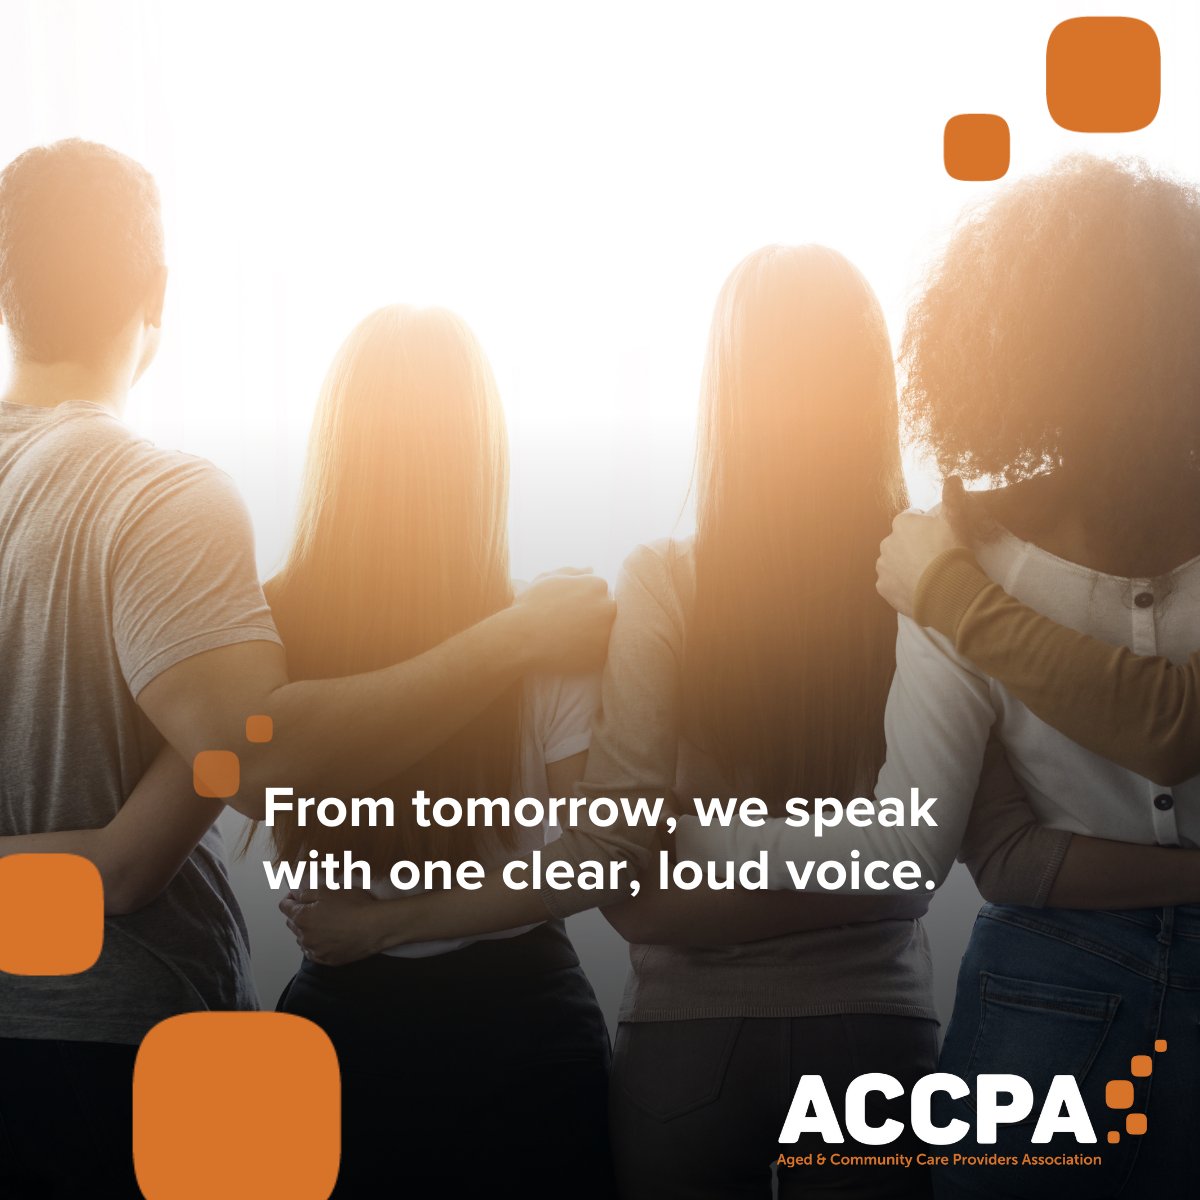 It's been an honour to serve @LASANational Members and the #agedcare sector, as LASA. From tomorrow 1 July, we speak with one clear, loud voice, to achieve transformational change through the new ACCPA, because we are #strongertogether. Follow this new voice here @ACCPAAustralia